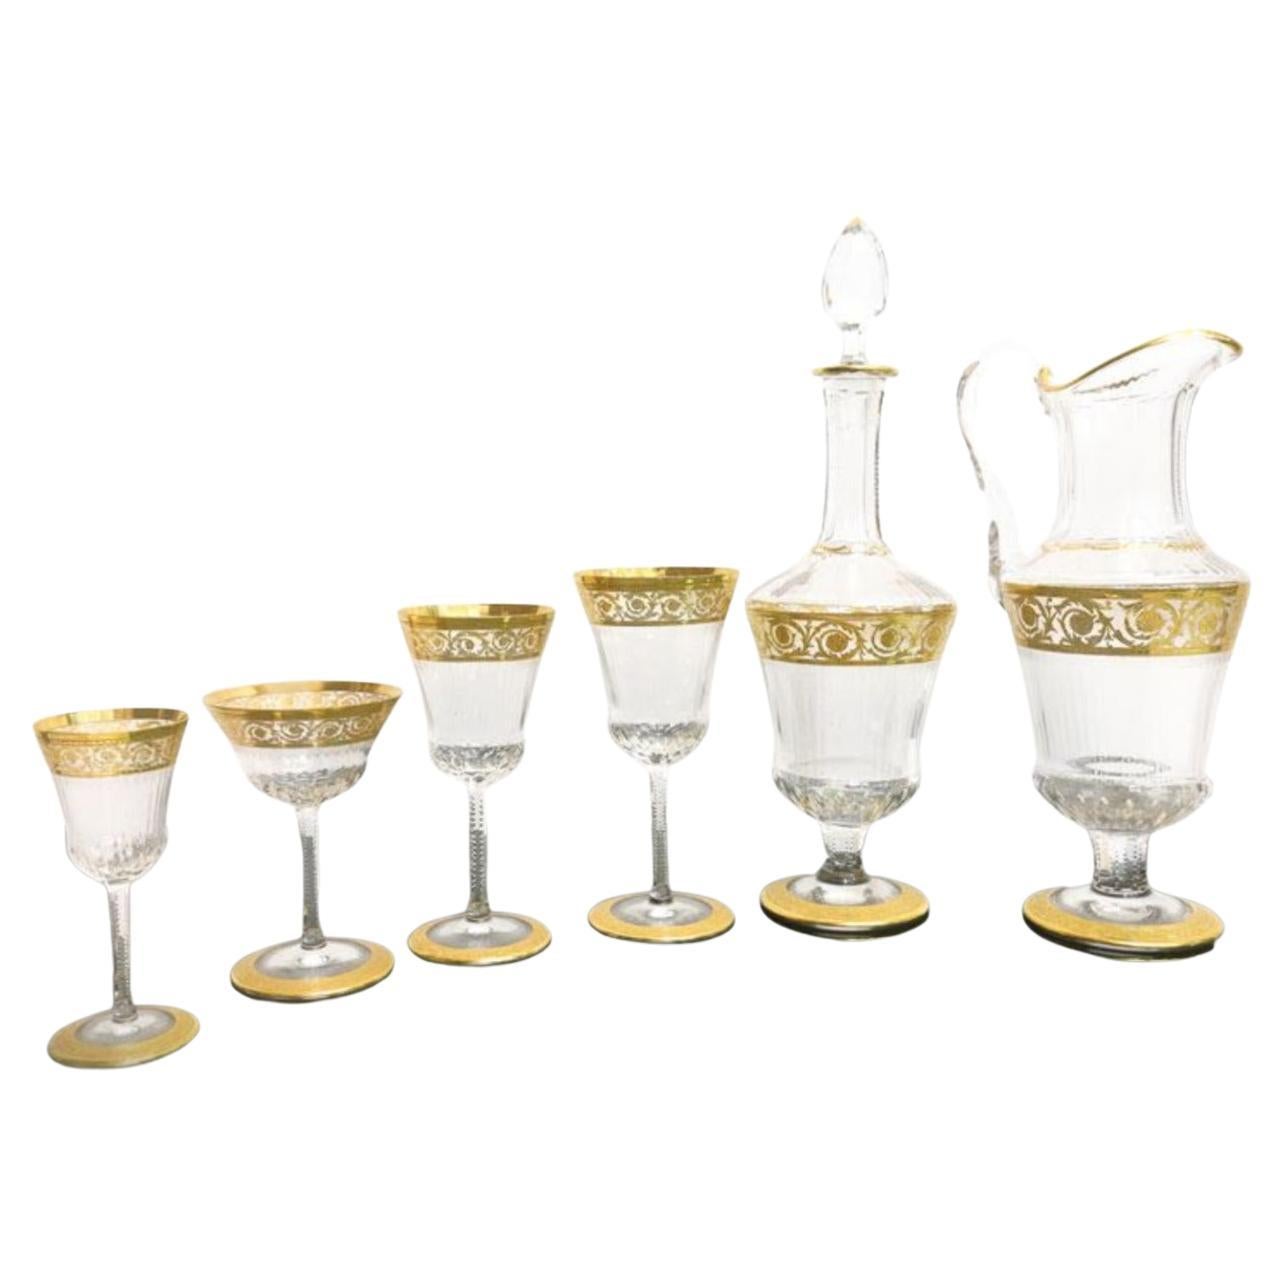 Amazing Saint Louis - France Set of 48 glasses and bottles, 'THISTLE GOLD' 20th